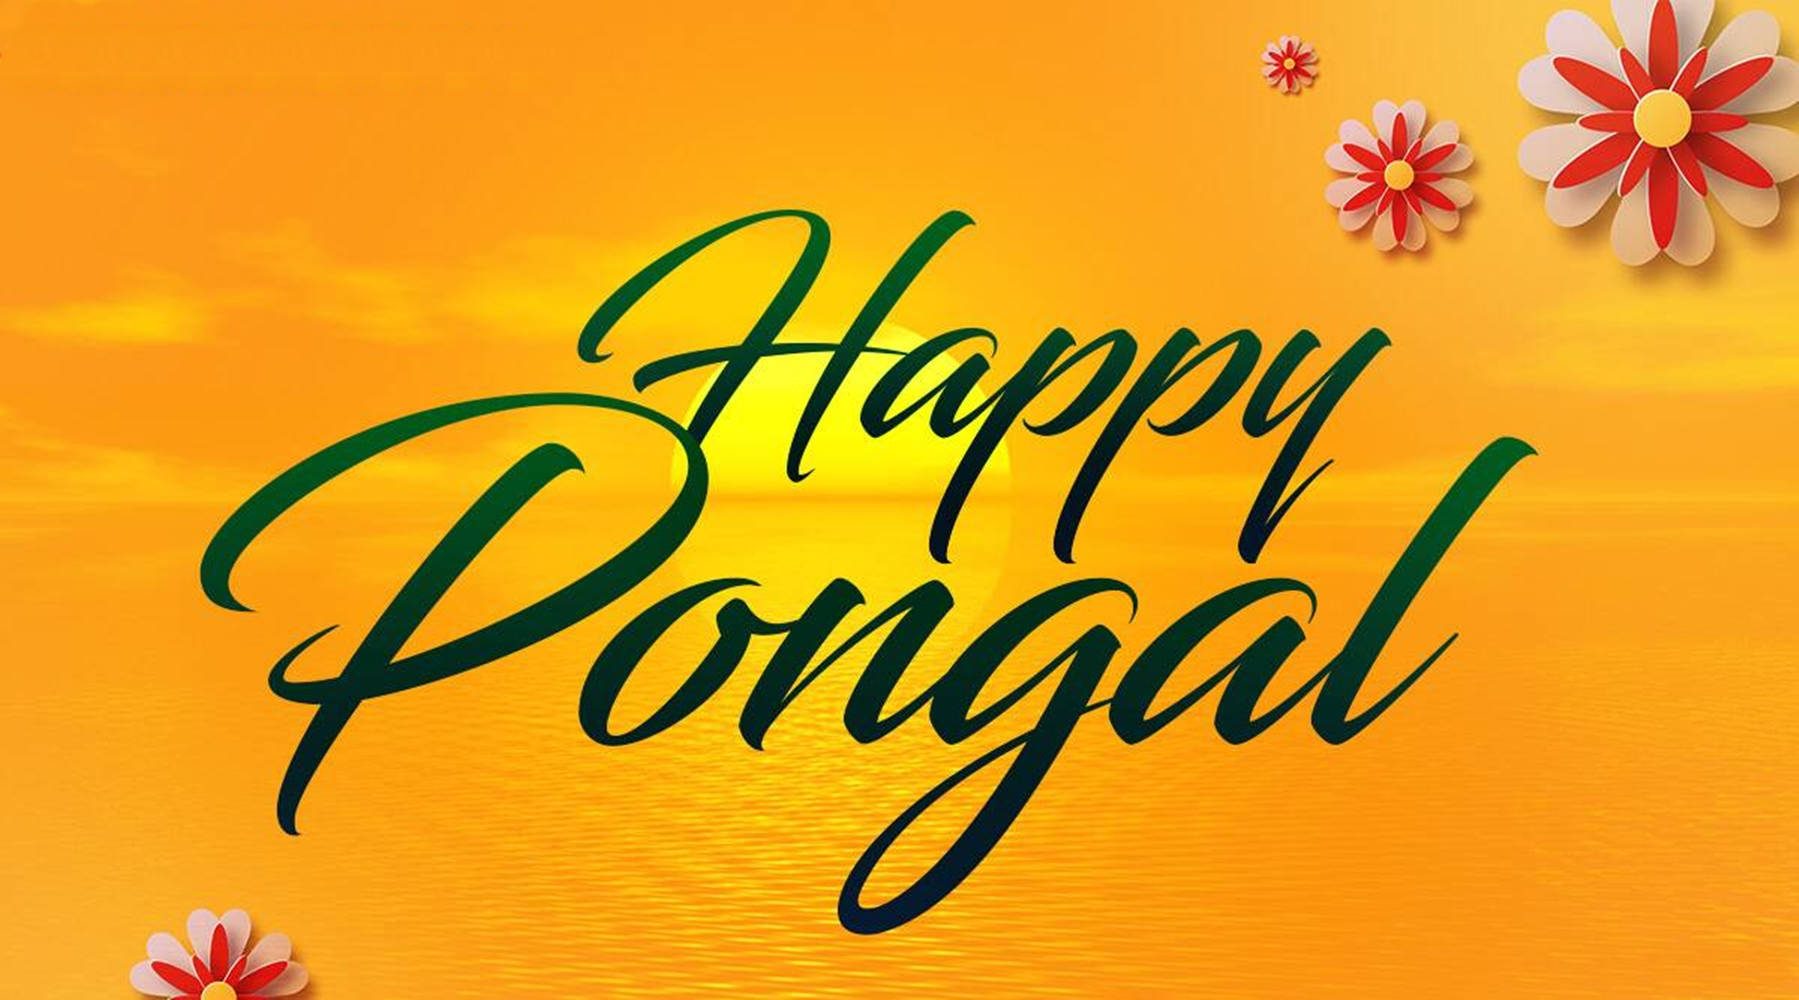 Happy Pongal wallpaper for desktop and mobile phone